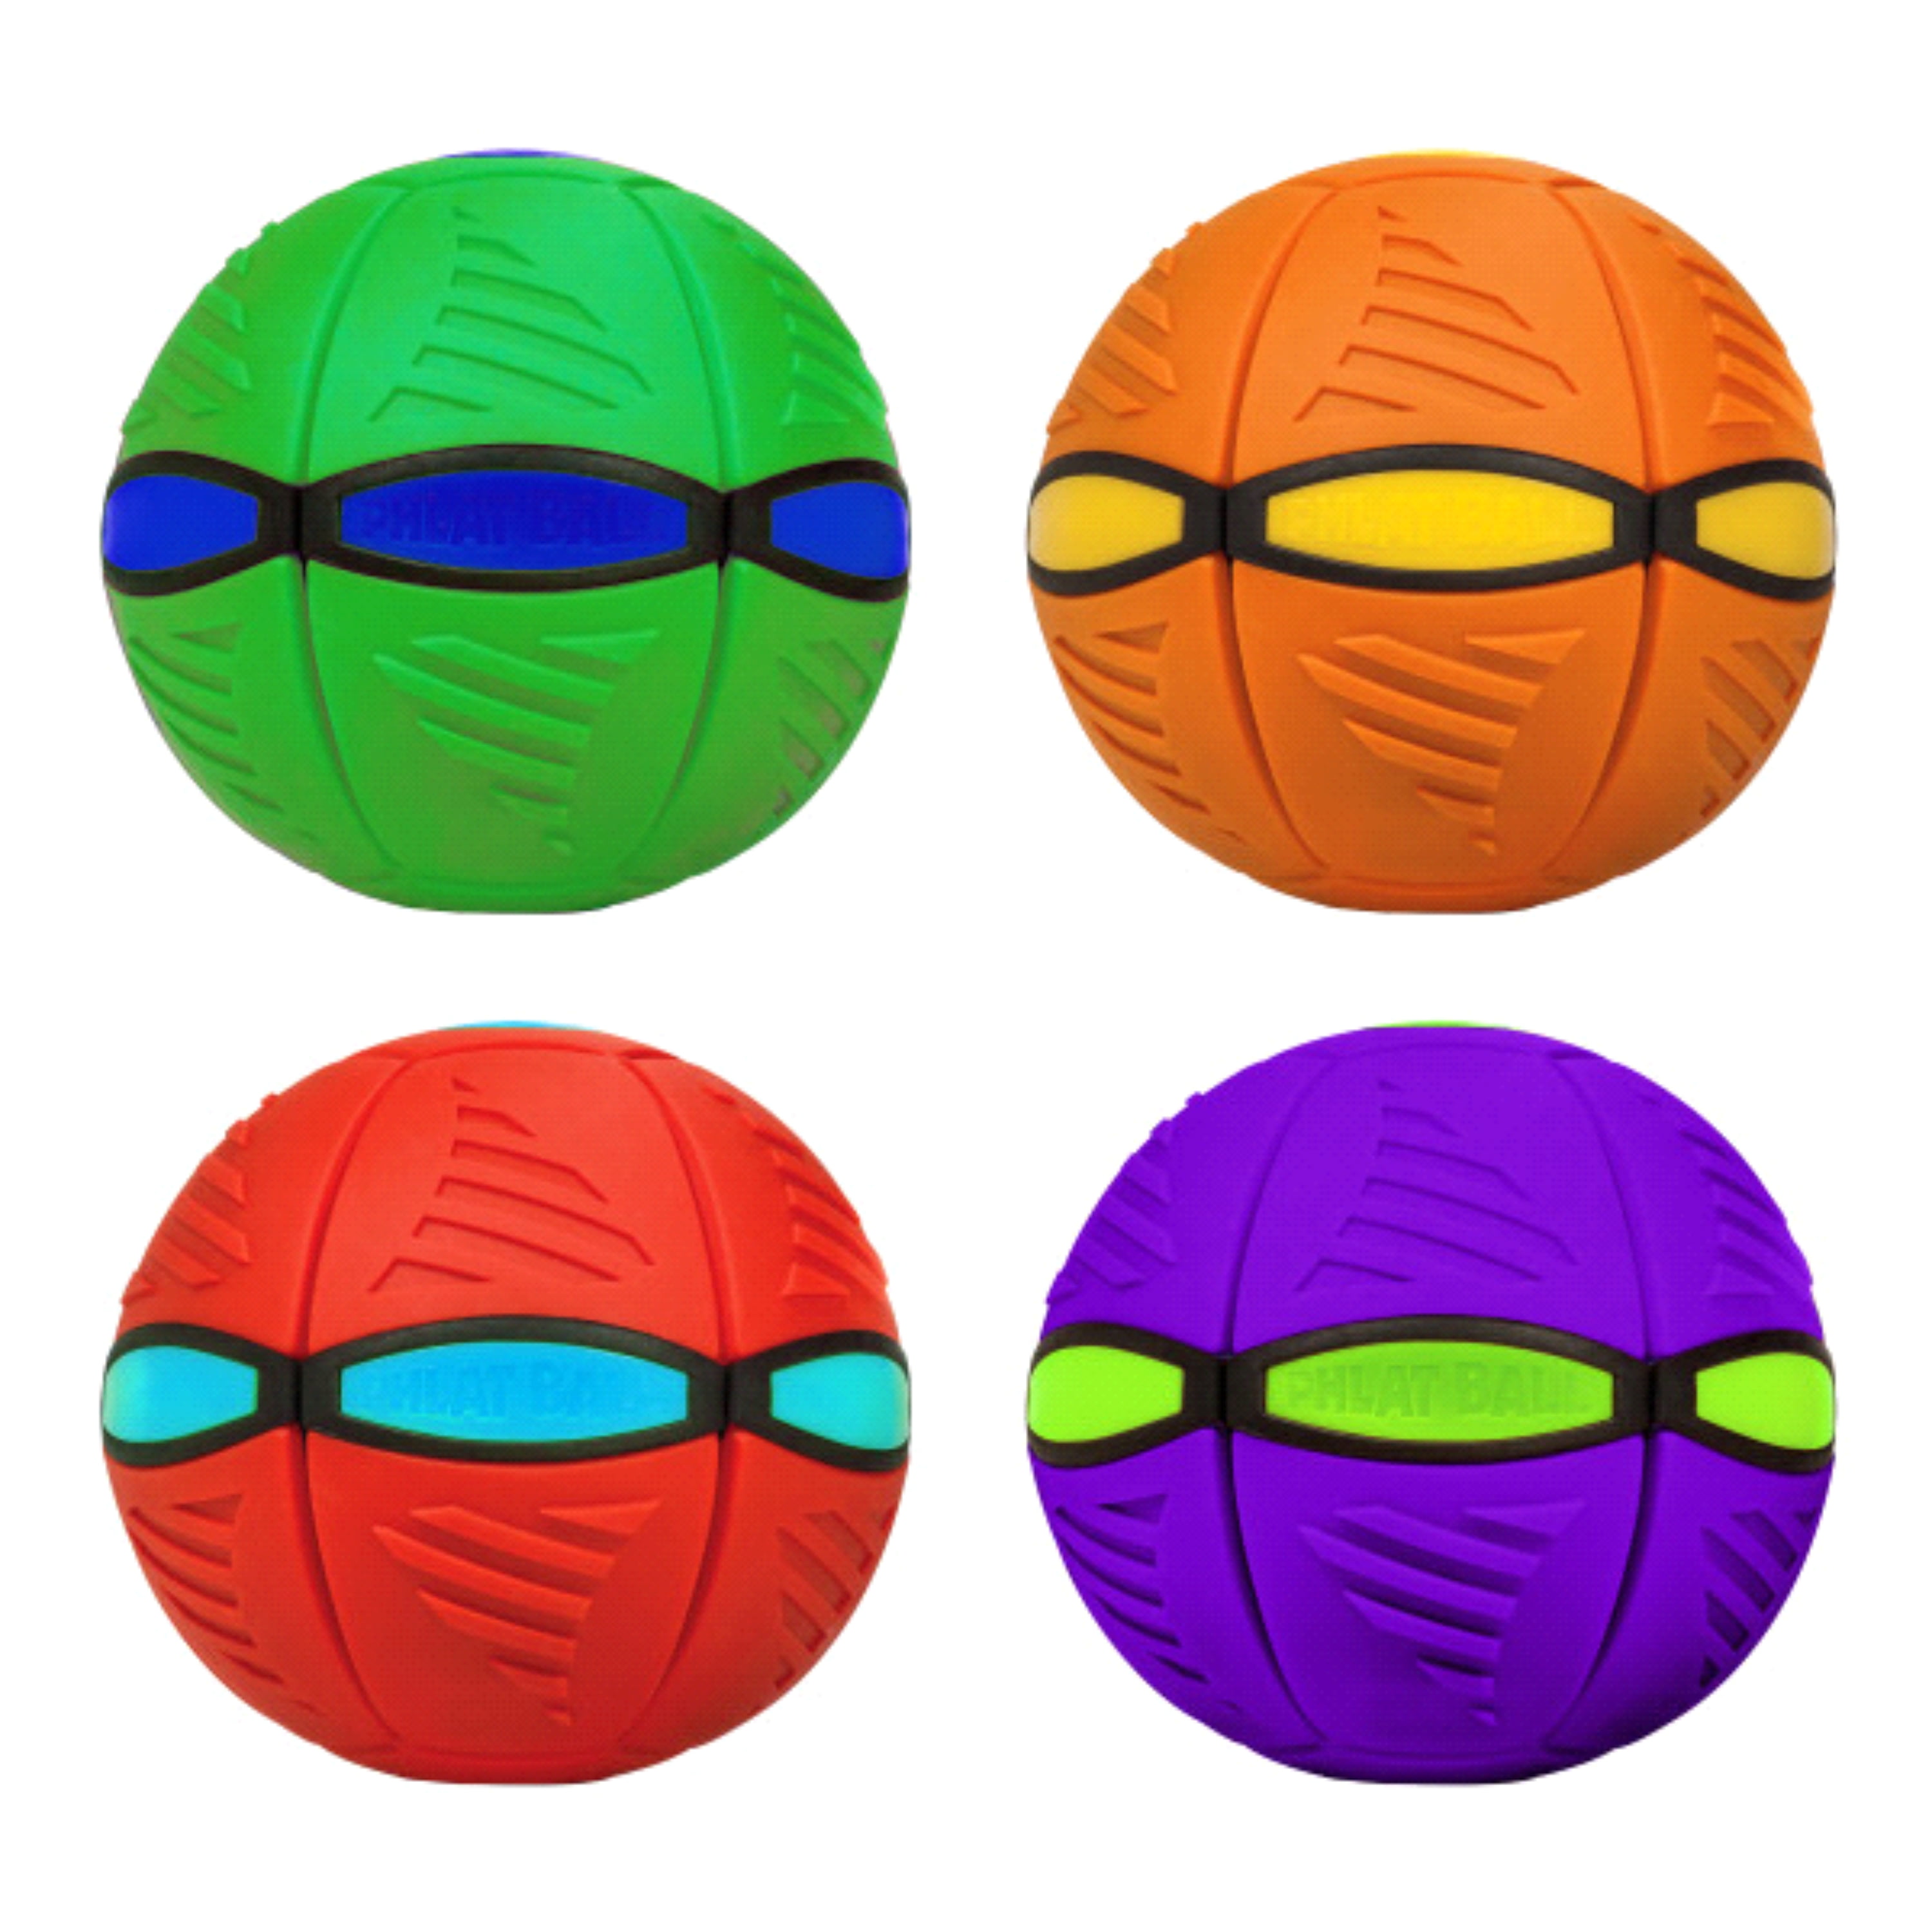 Jack Attack Xtreme High Bounce Ball 2.8 in Rubber Agility Ball Let Them Play Outside Use in The Park Playground Backyard Streets Training Field Improve Reaction Time Wholesale Bulk Gifts